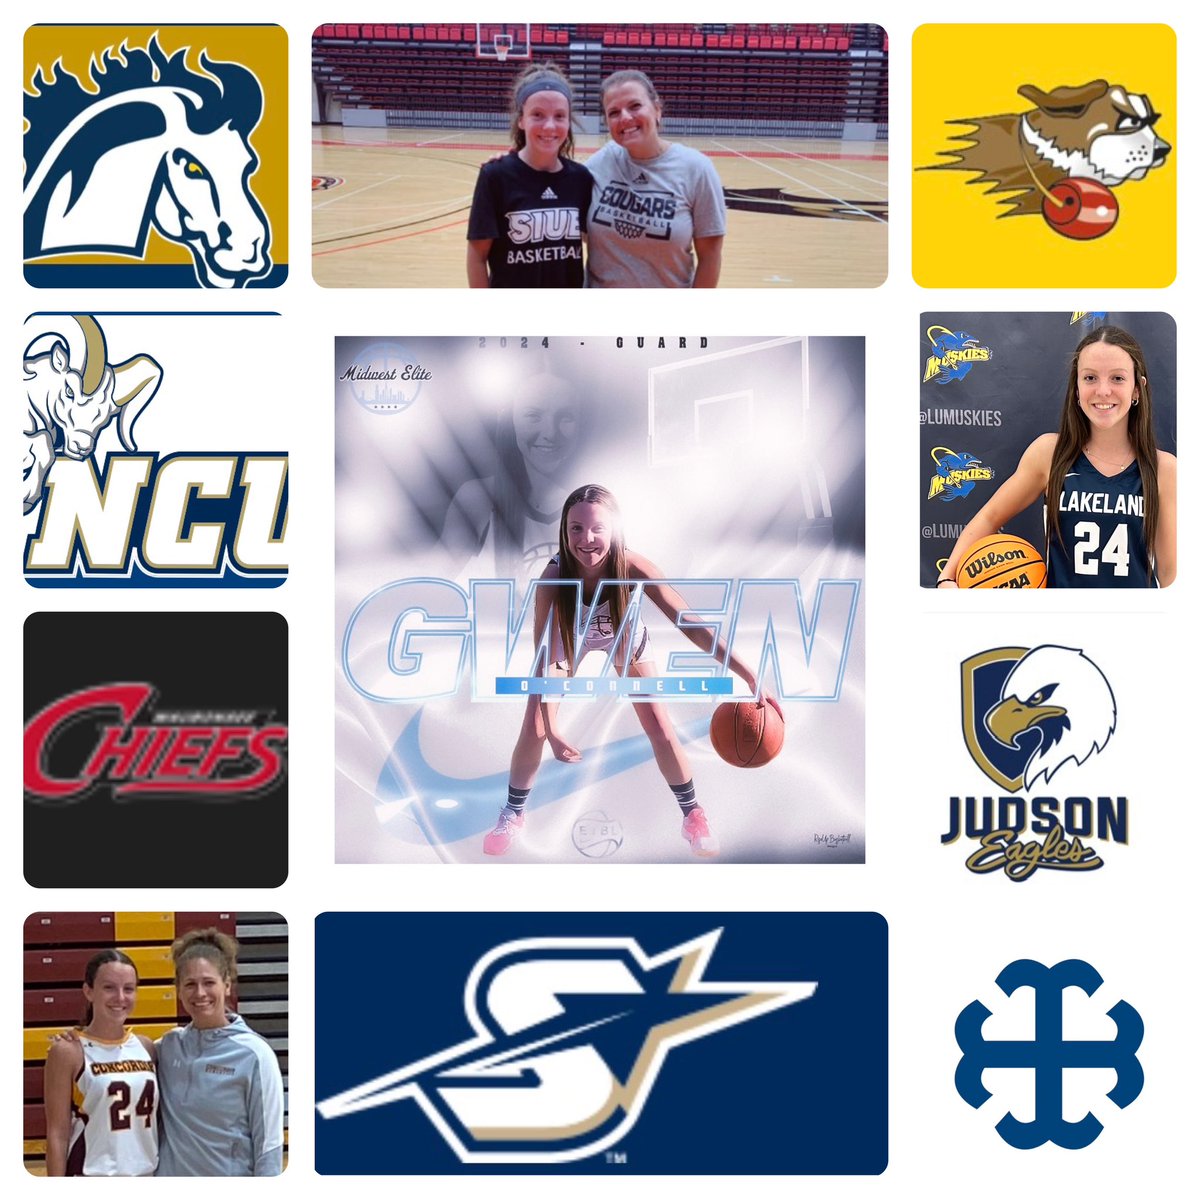 Thank you to all the college coaches that have supported me and continue to believe in my future as a basketball player. The time is now, time to make that choice for my future! Thank you for all the offers. Looking forward to some upcoming visits! @GameGrinderQ